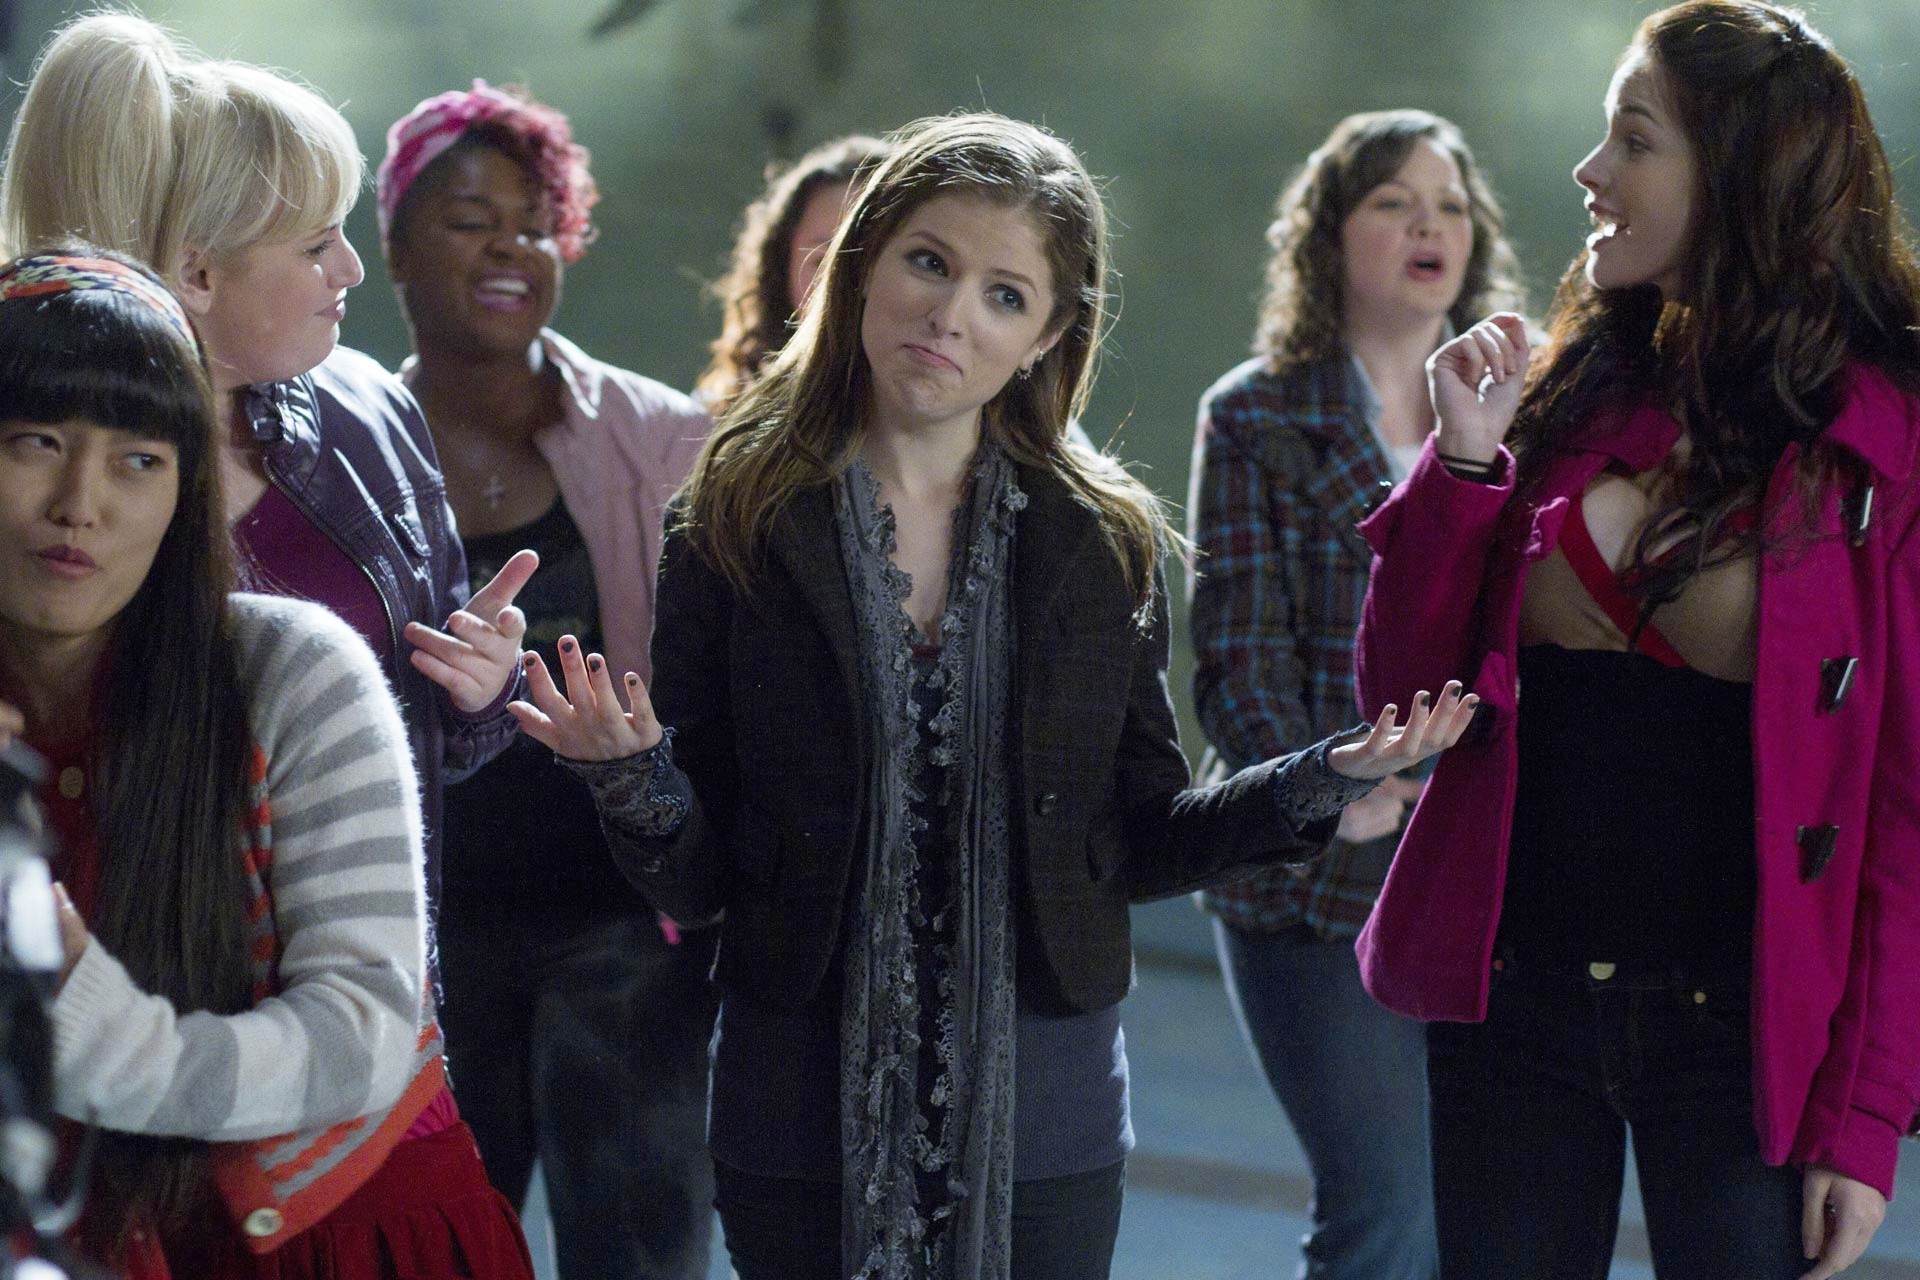 Hana Mae Lee, Rebel Wilson, Anna Kendrick and Alexis Knapp in Universal Pictures' Pitch Perfect (2012)